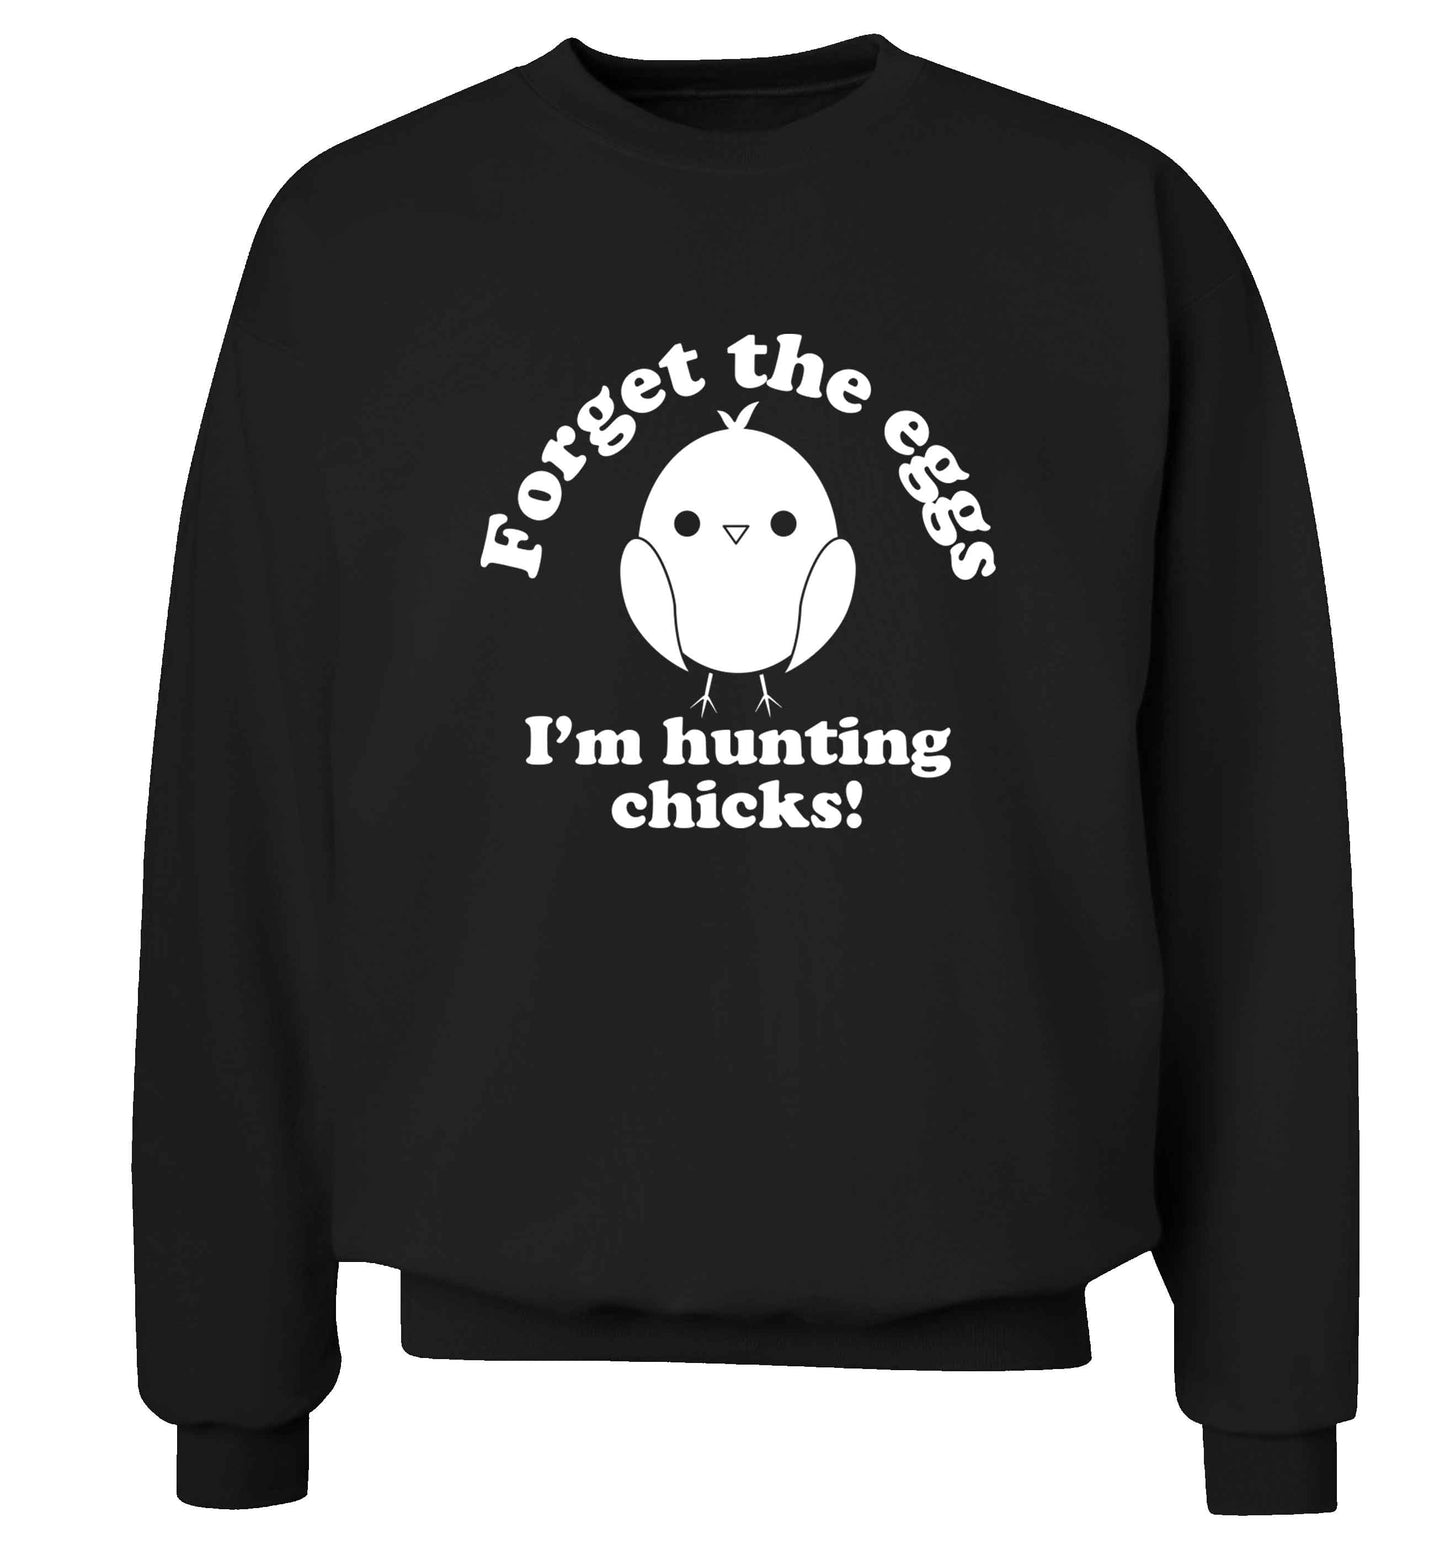 Forget the eggs I'm hunting chicks! adult's unisex black sweater 2XL